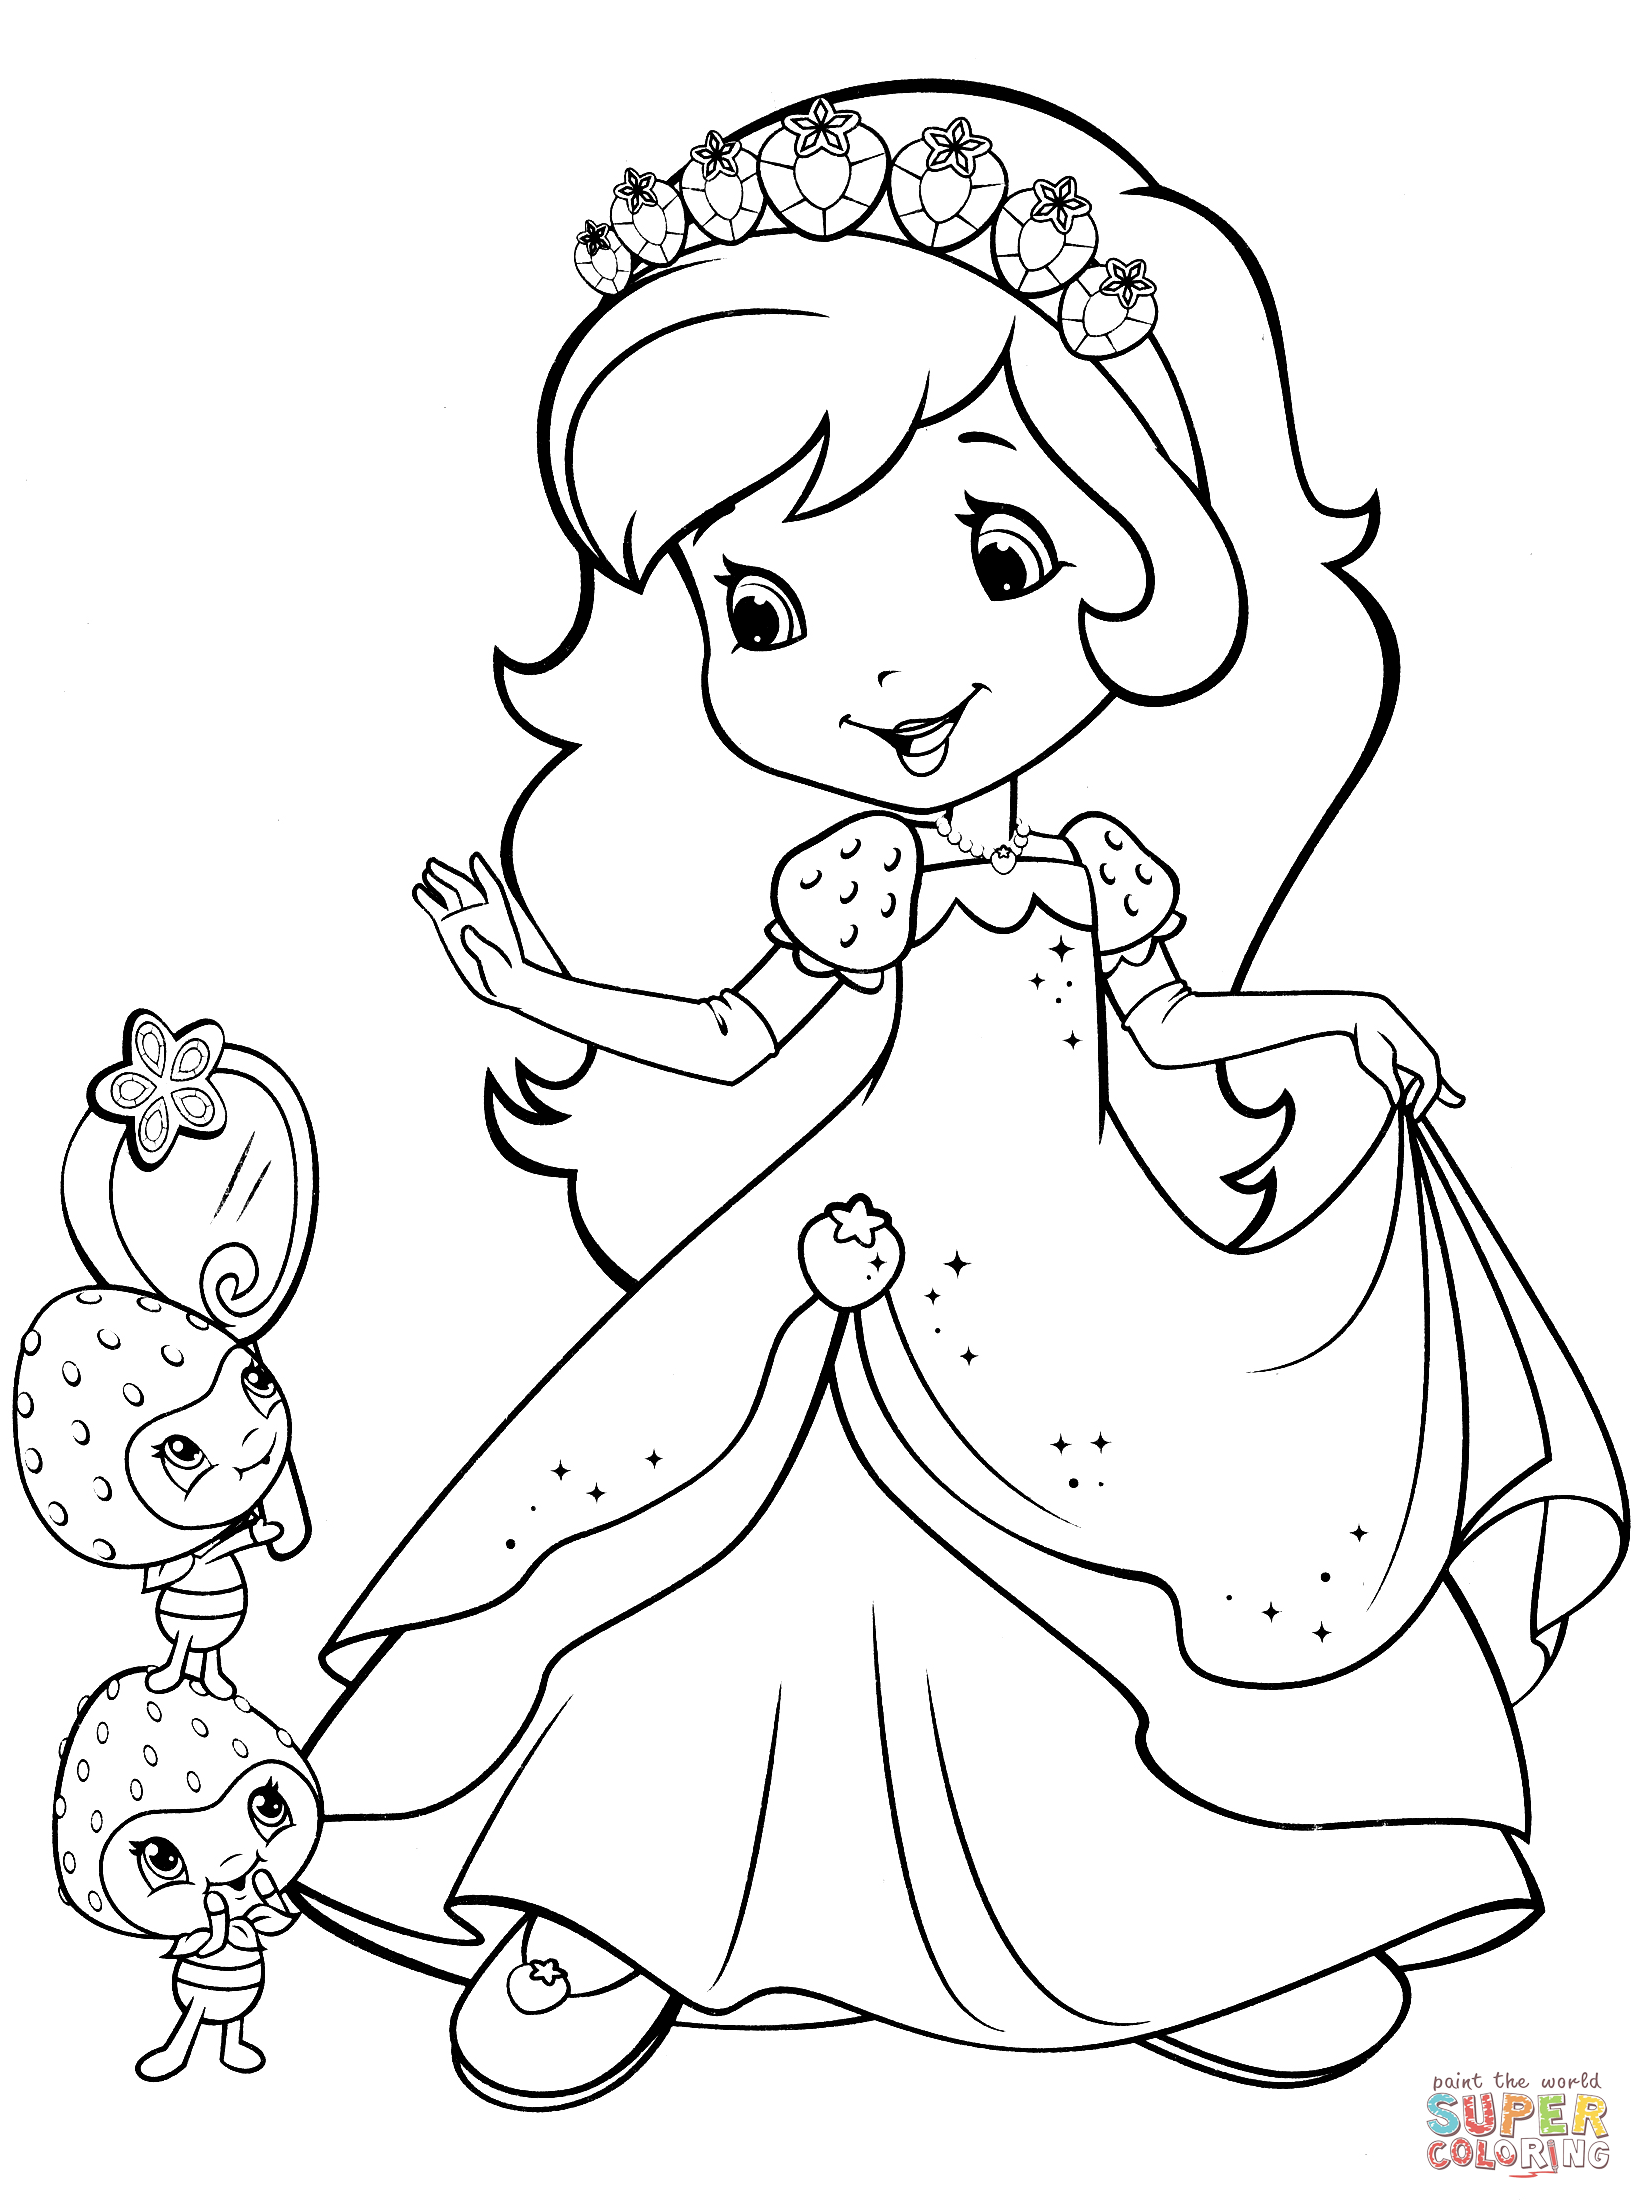 Strawberry shortcake and berrykins coloring page free printable coloring pages